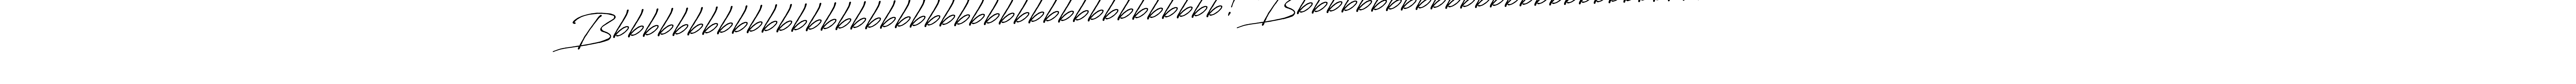 How to make Bbbbbbbbbbbbbbbbbbbbbbbbbbbbbbbbbbbbbbbbbb! Bbbbbbbbbbbbbbbbbbbbbbbbbbbbbbbbbbbbbbbbbbbbbbbb name signature. Use Antro_Vectra_Bolder style for creating short signs online. This is the latest handwritten sign. Bbbbbbbbbbbbbbbbbbbbbbbbbbbbbbbbbbbbbbbbbb! Bbbbbbbbbbbbbbbbbbbbbbbbbbbbbbbbbbbbbbbbbbbbbbbb signature style 7 images and pictures png